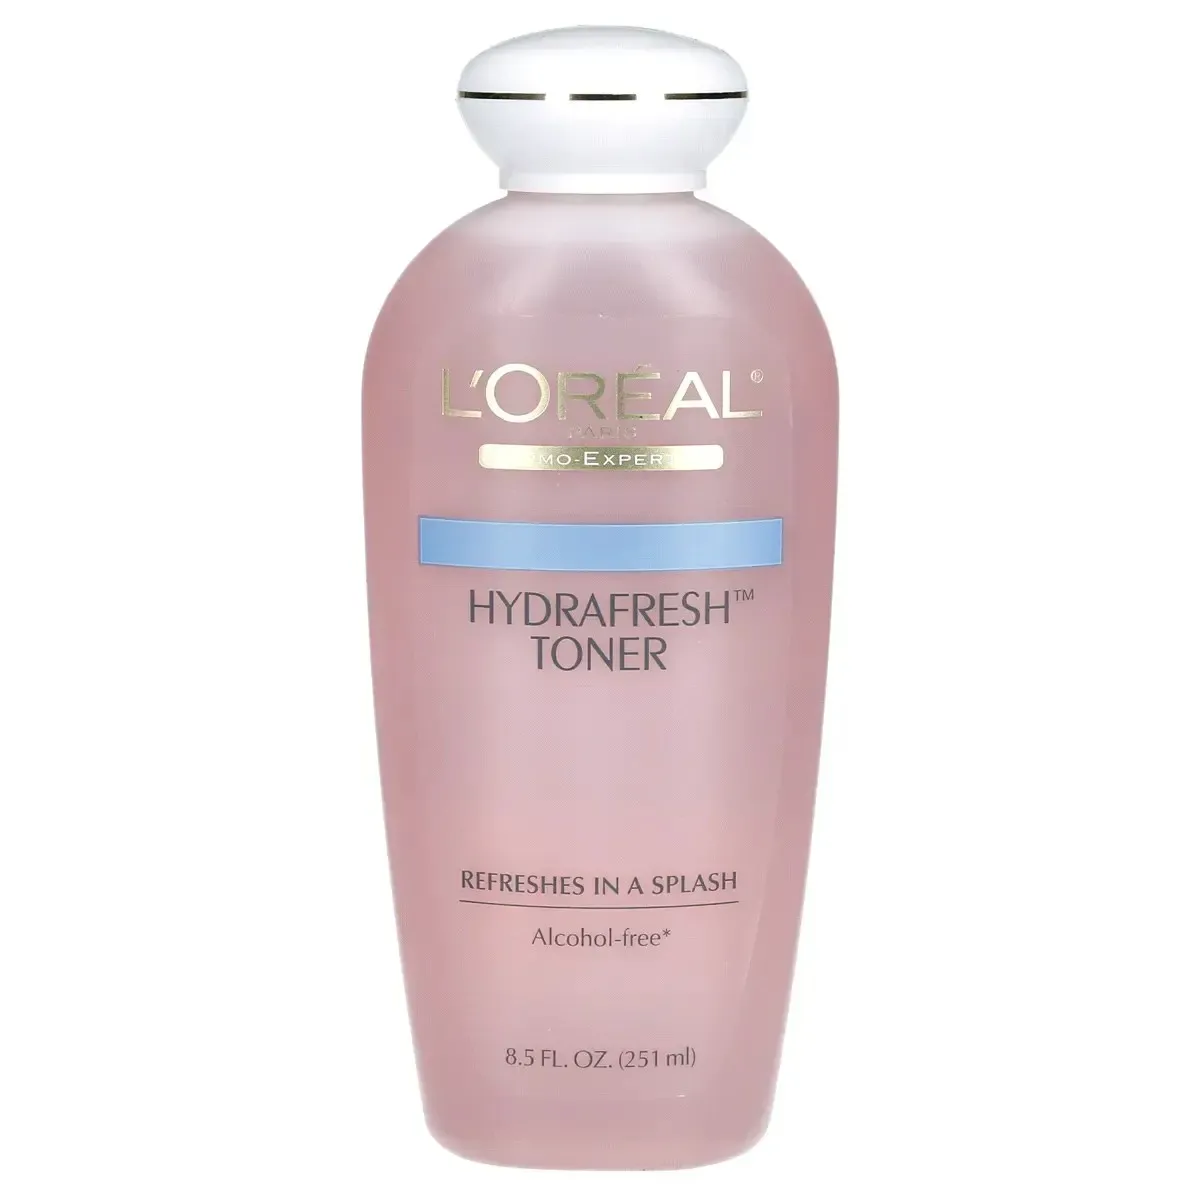 HydraFresh Toner by L'Oreal, the best budget French toner.